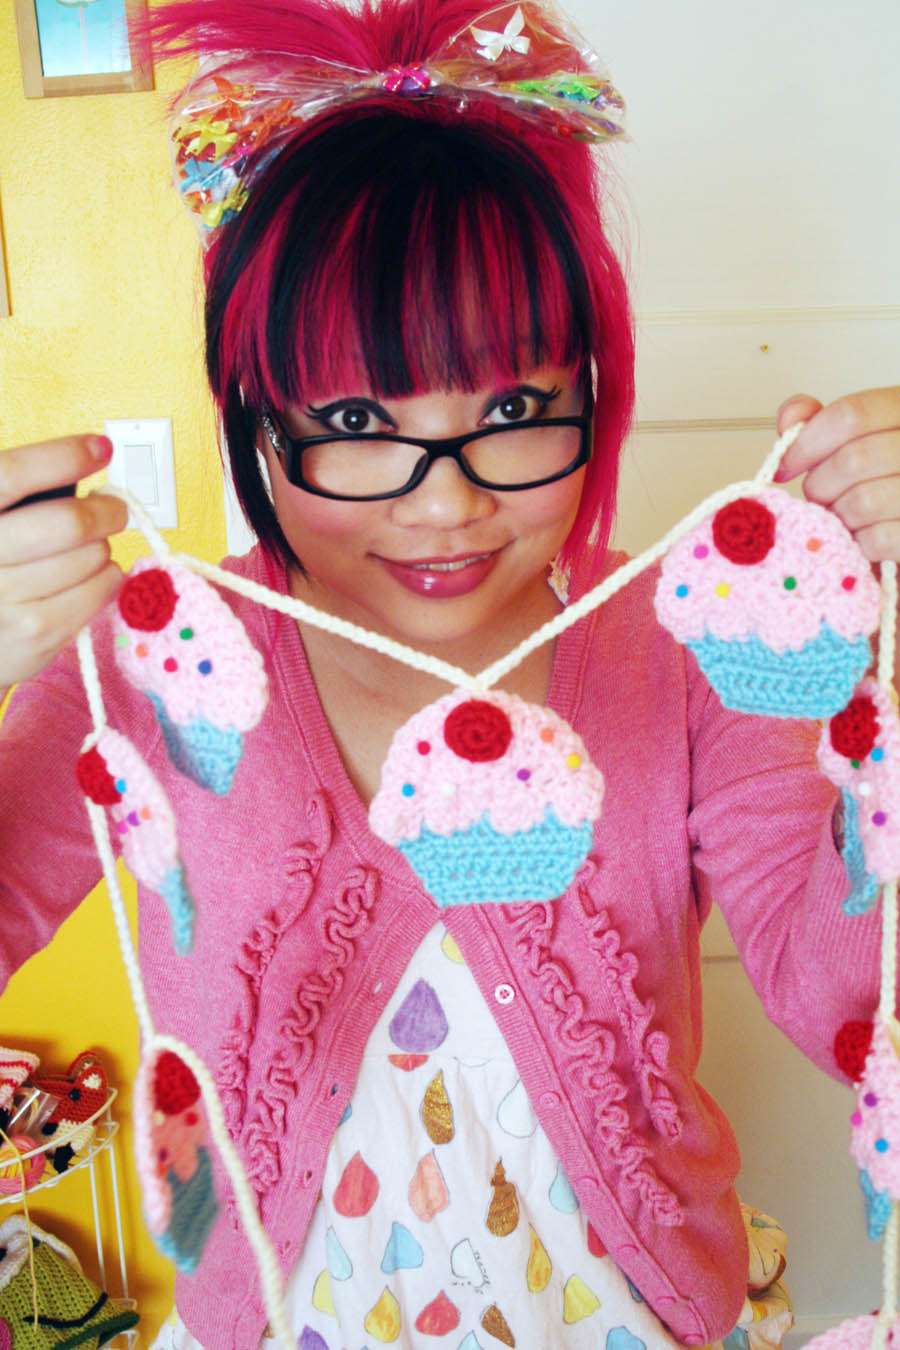 How to…Crochet Your Own Cupcake Garland (DIY Tutorial by Twinkie Chan) +  Giveaway! · Rock n Roll Bride